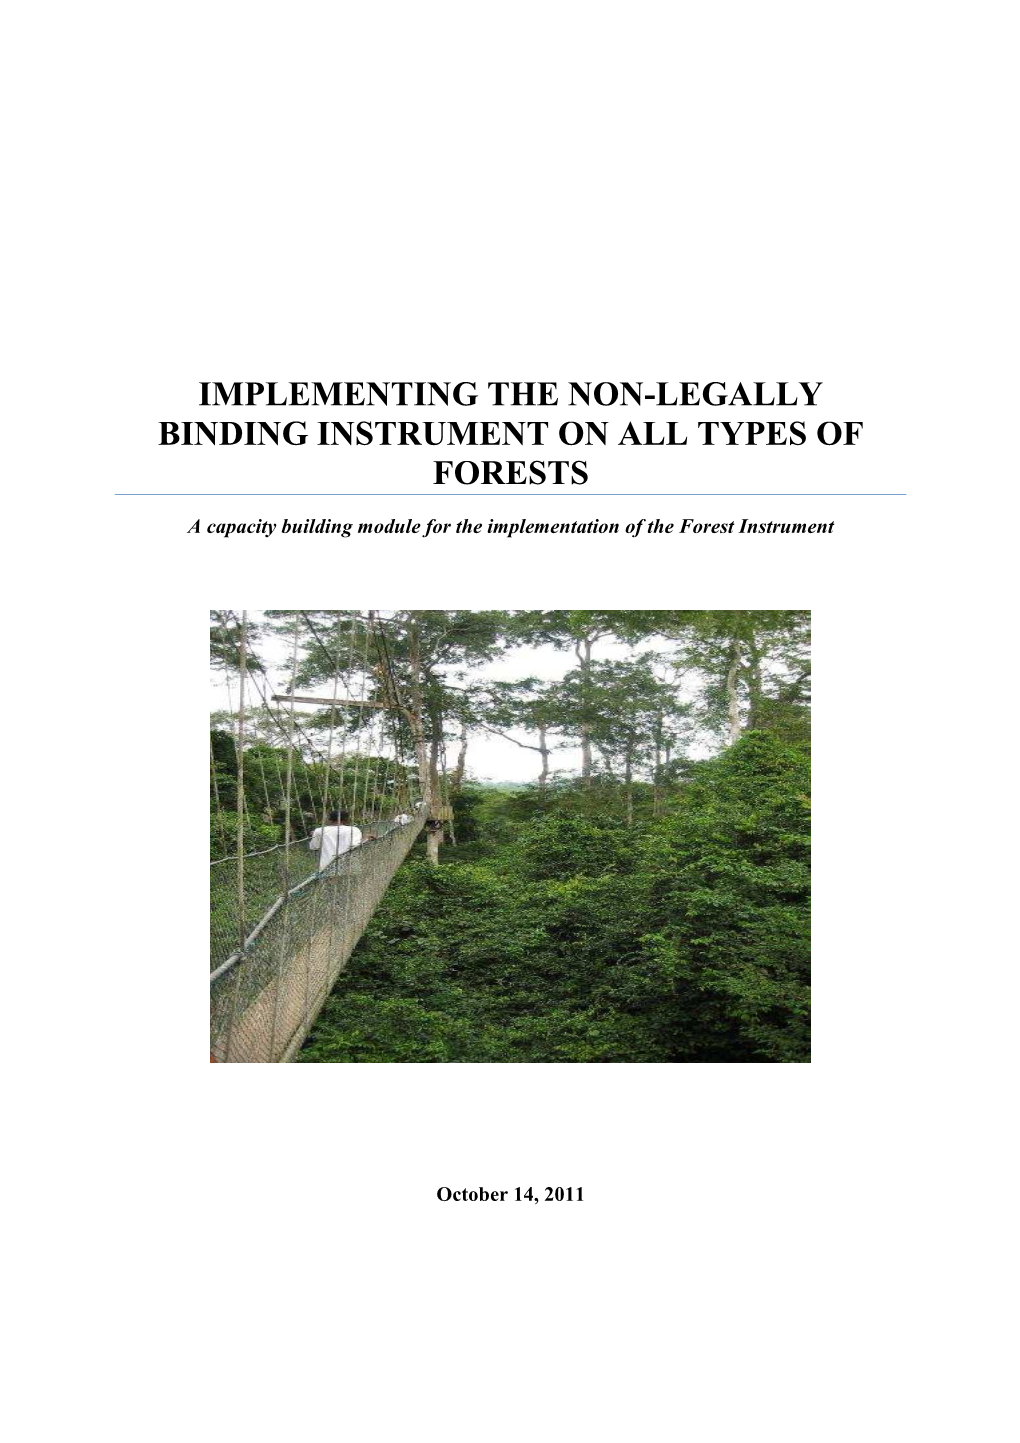 Implementing the Non-Legally Binding Instrument on All Types of Forests